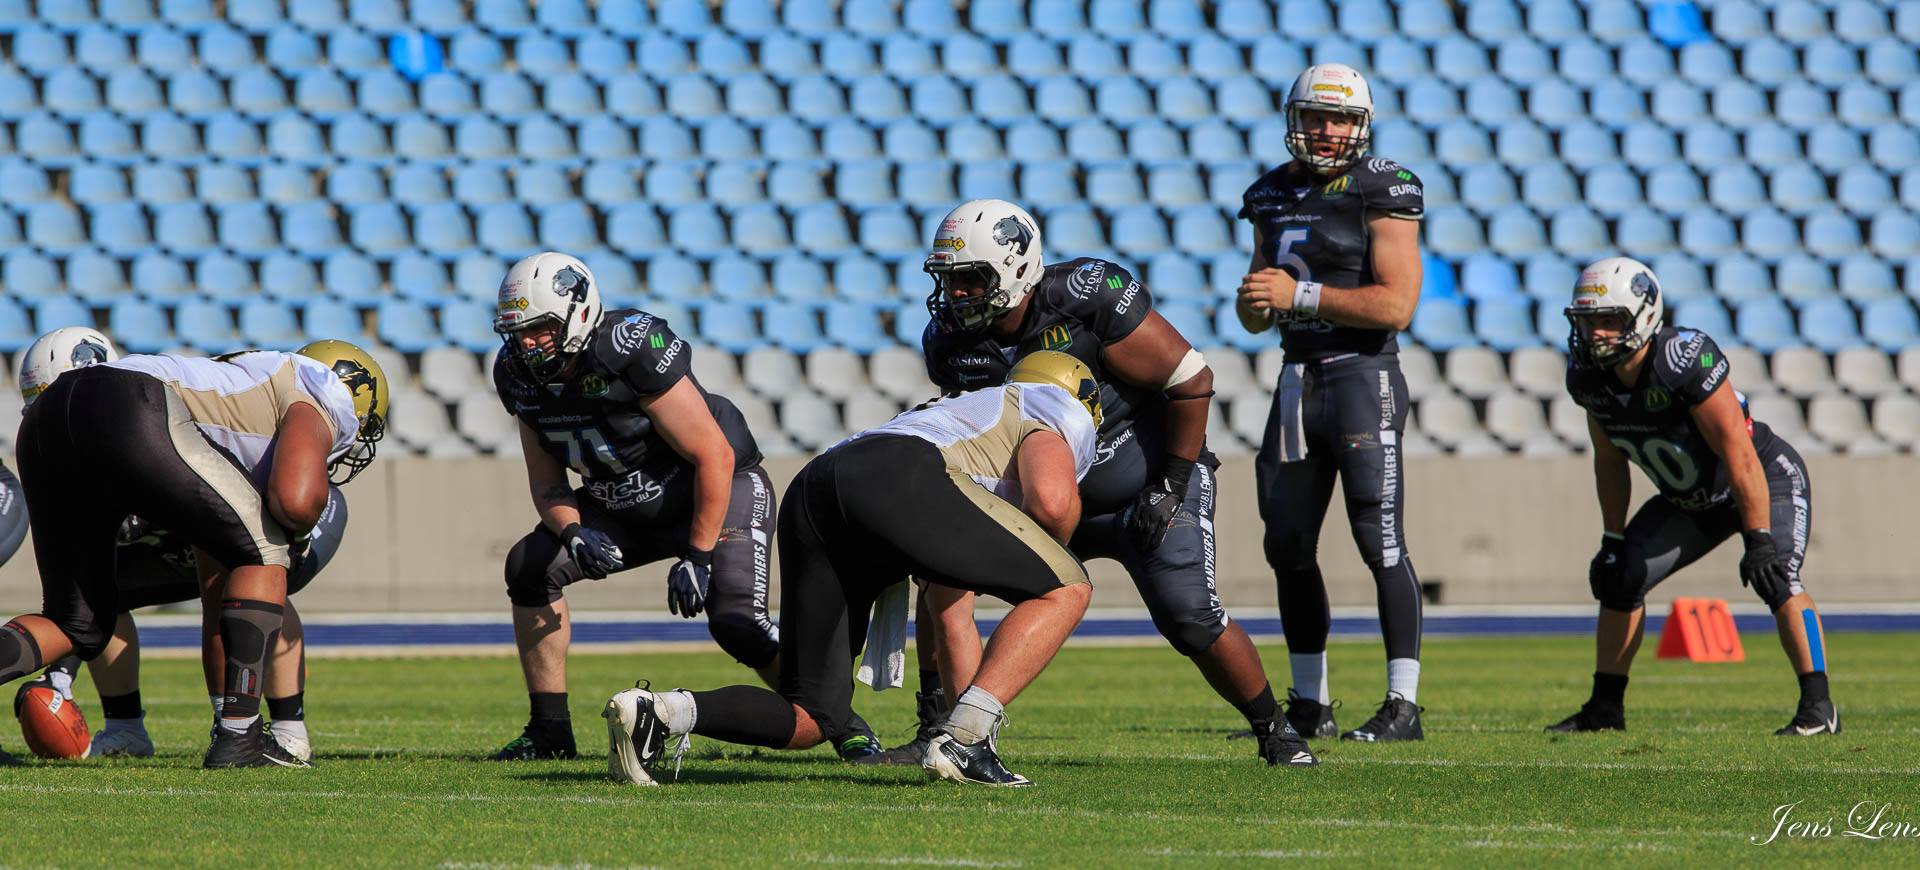 French League of American Football MVP Clark Evans: “Wonderful to be